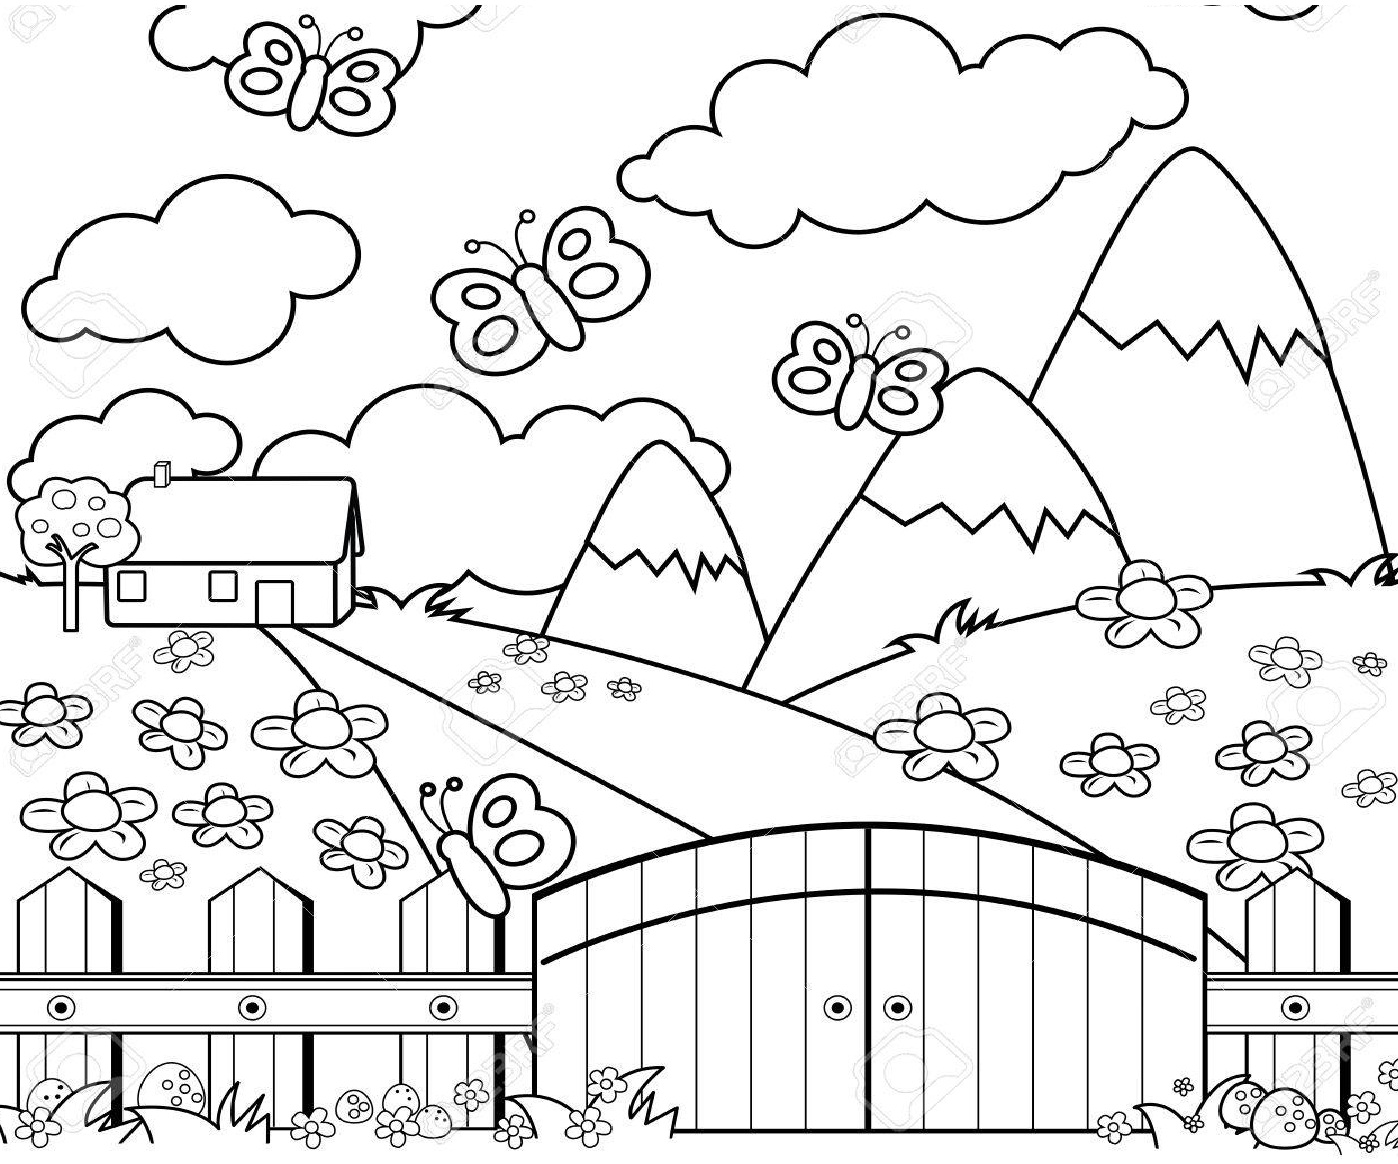 Hill Coloring Pages.